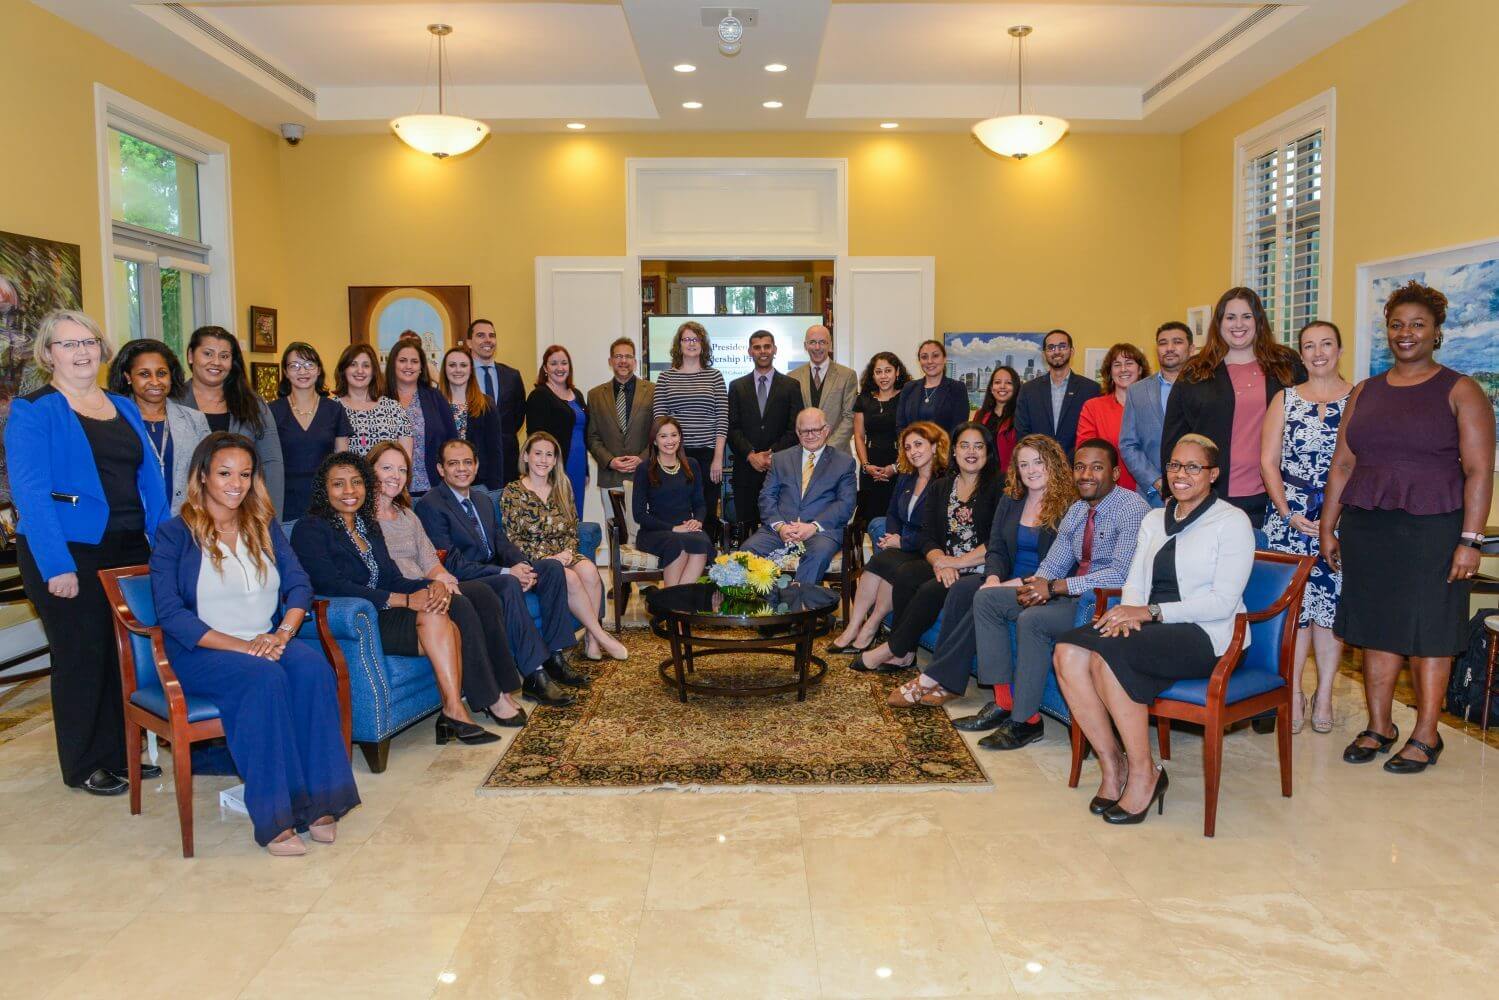 A group photo of cohort #4 of the President's leadership program inside the Ronald W. Reagan Presidential House